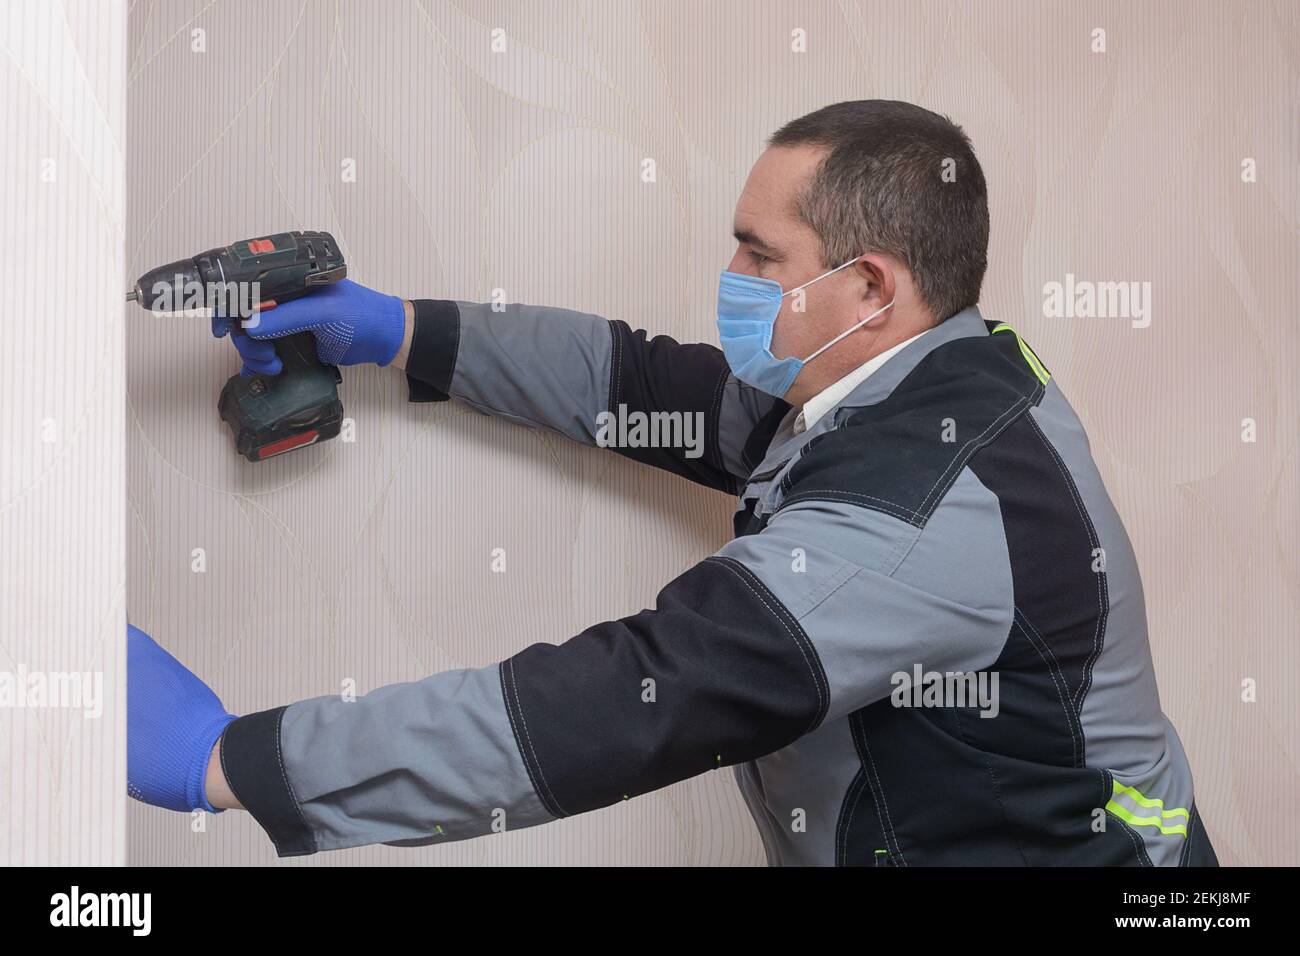 Repairman in overalls works as screwdriver. Master wearing  medical mask and gloves complies with safety rules during pandemic. Stock Photo